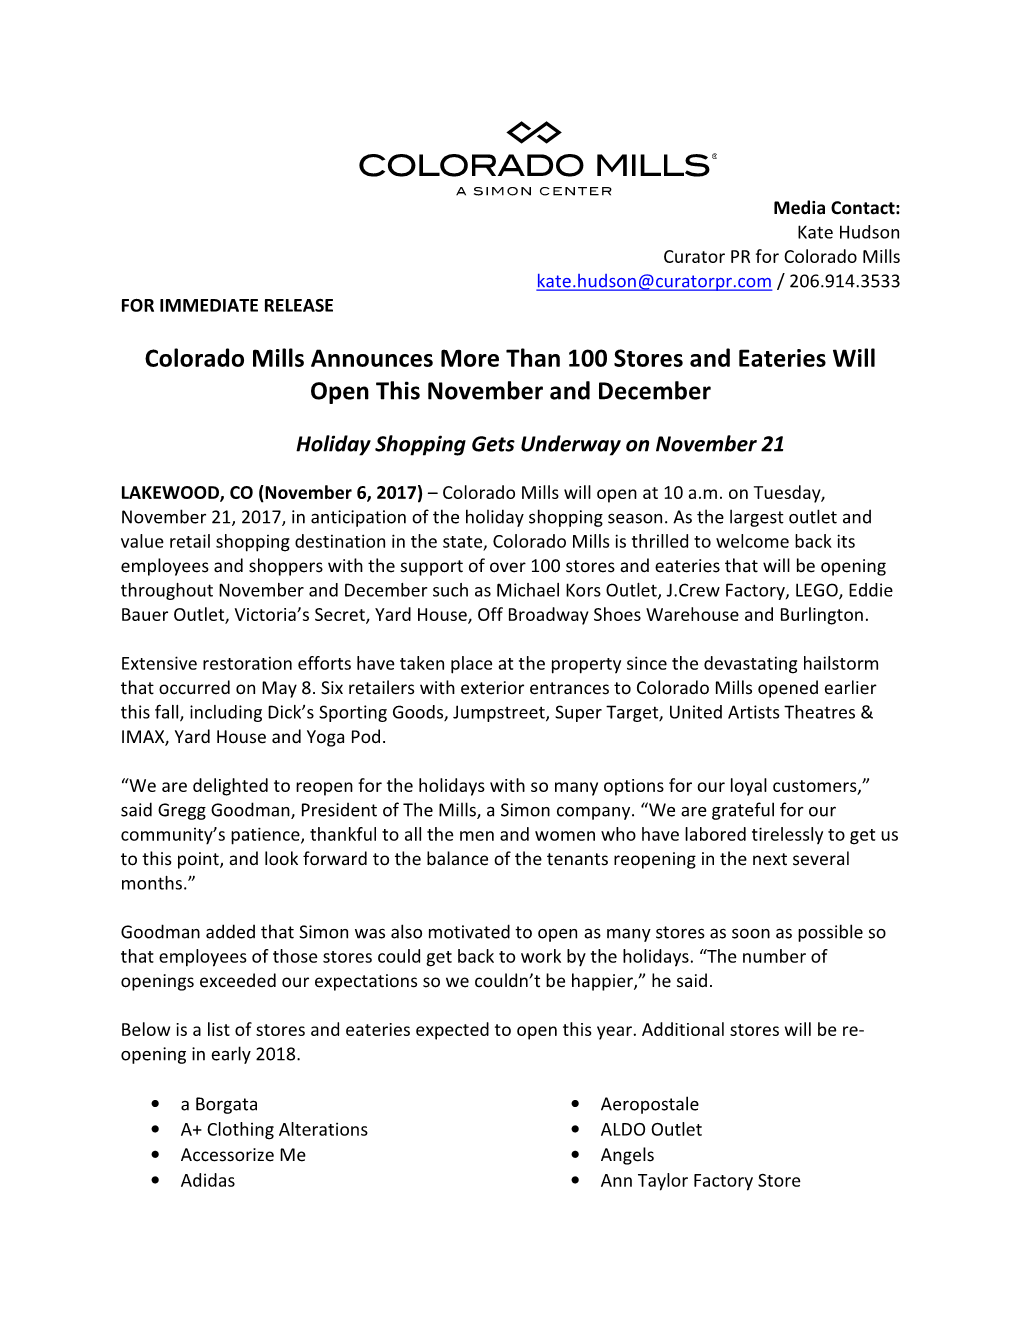 Colorado Mills Announces More Than 100 Stores and Eateries Will Open This November and December